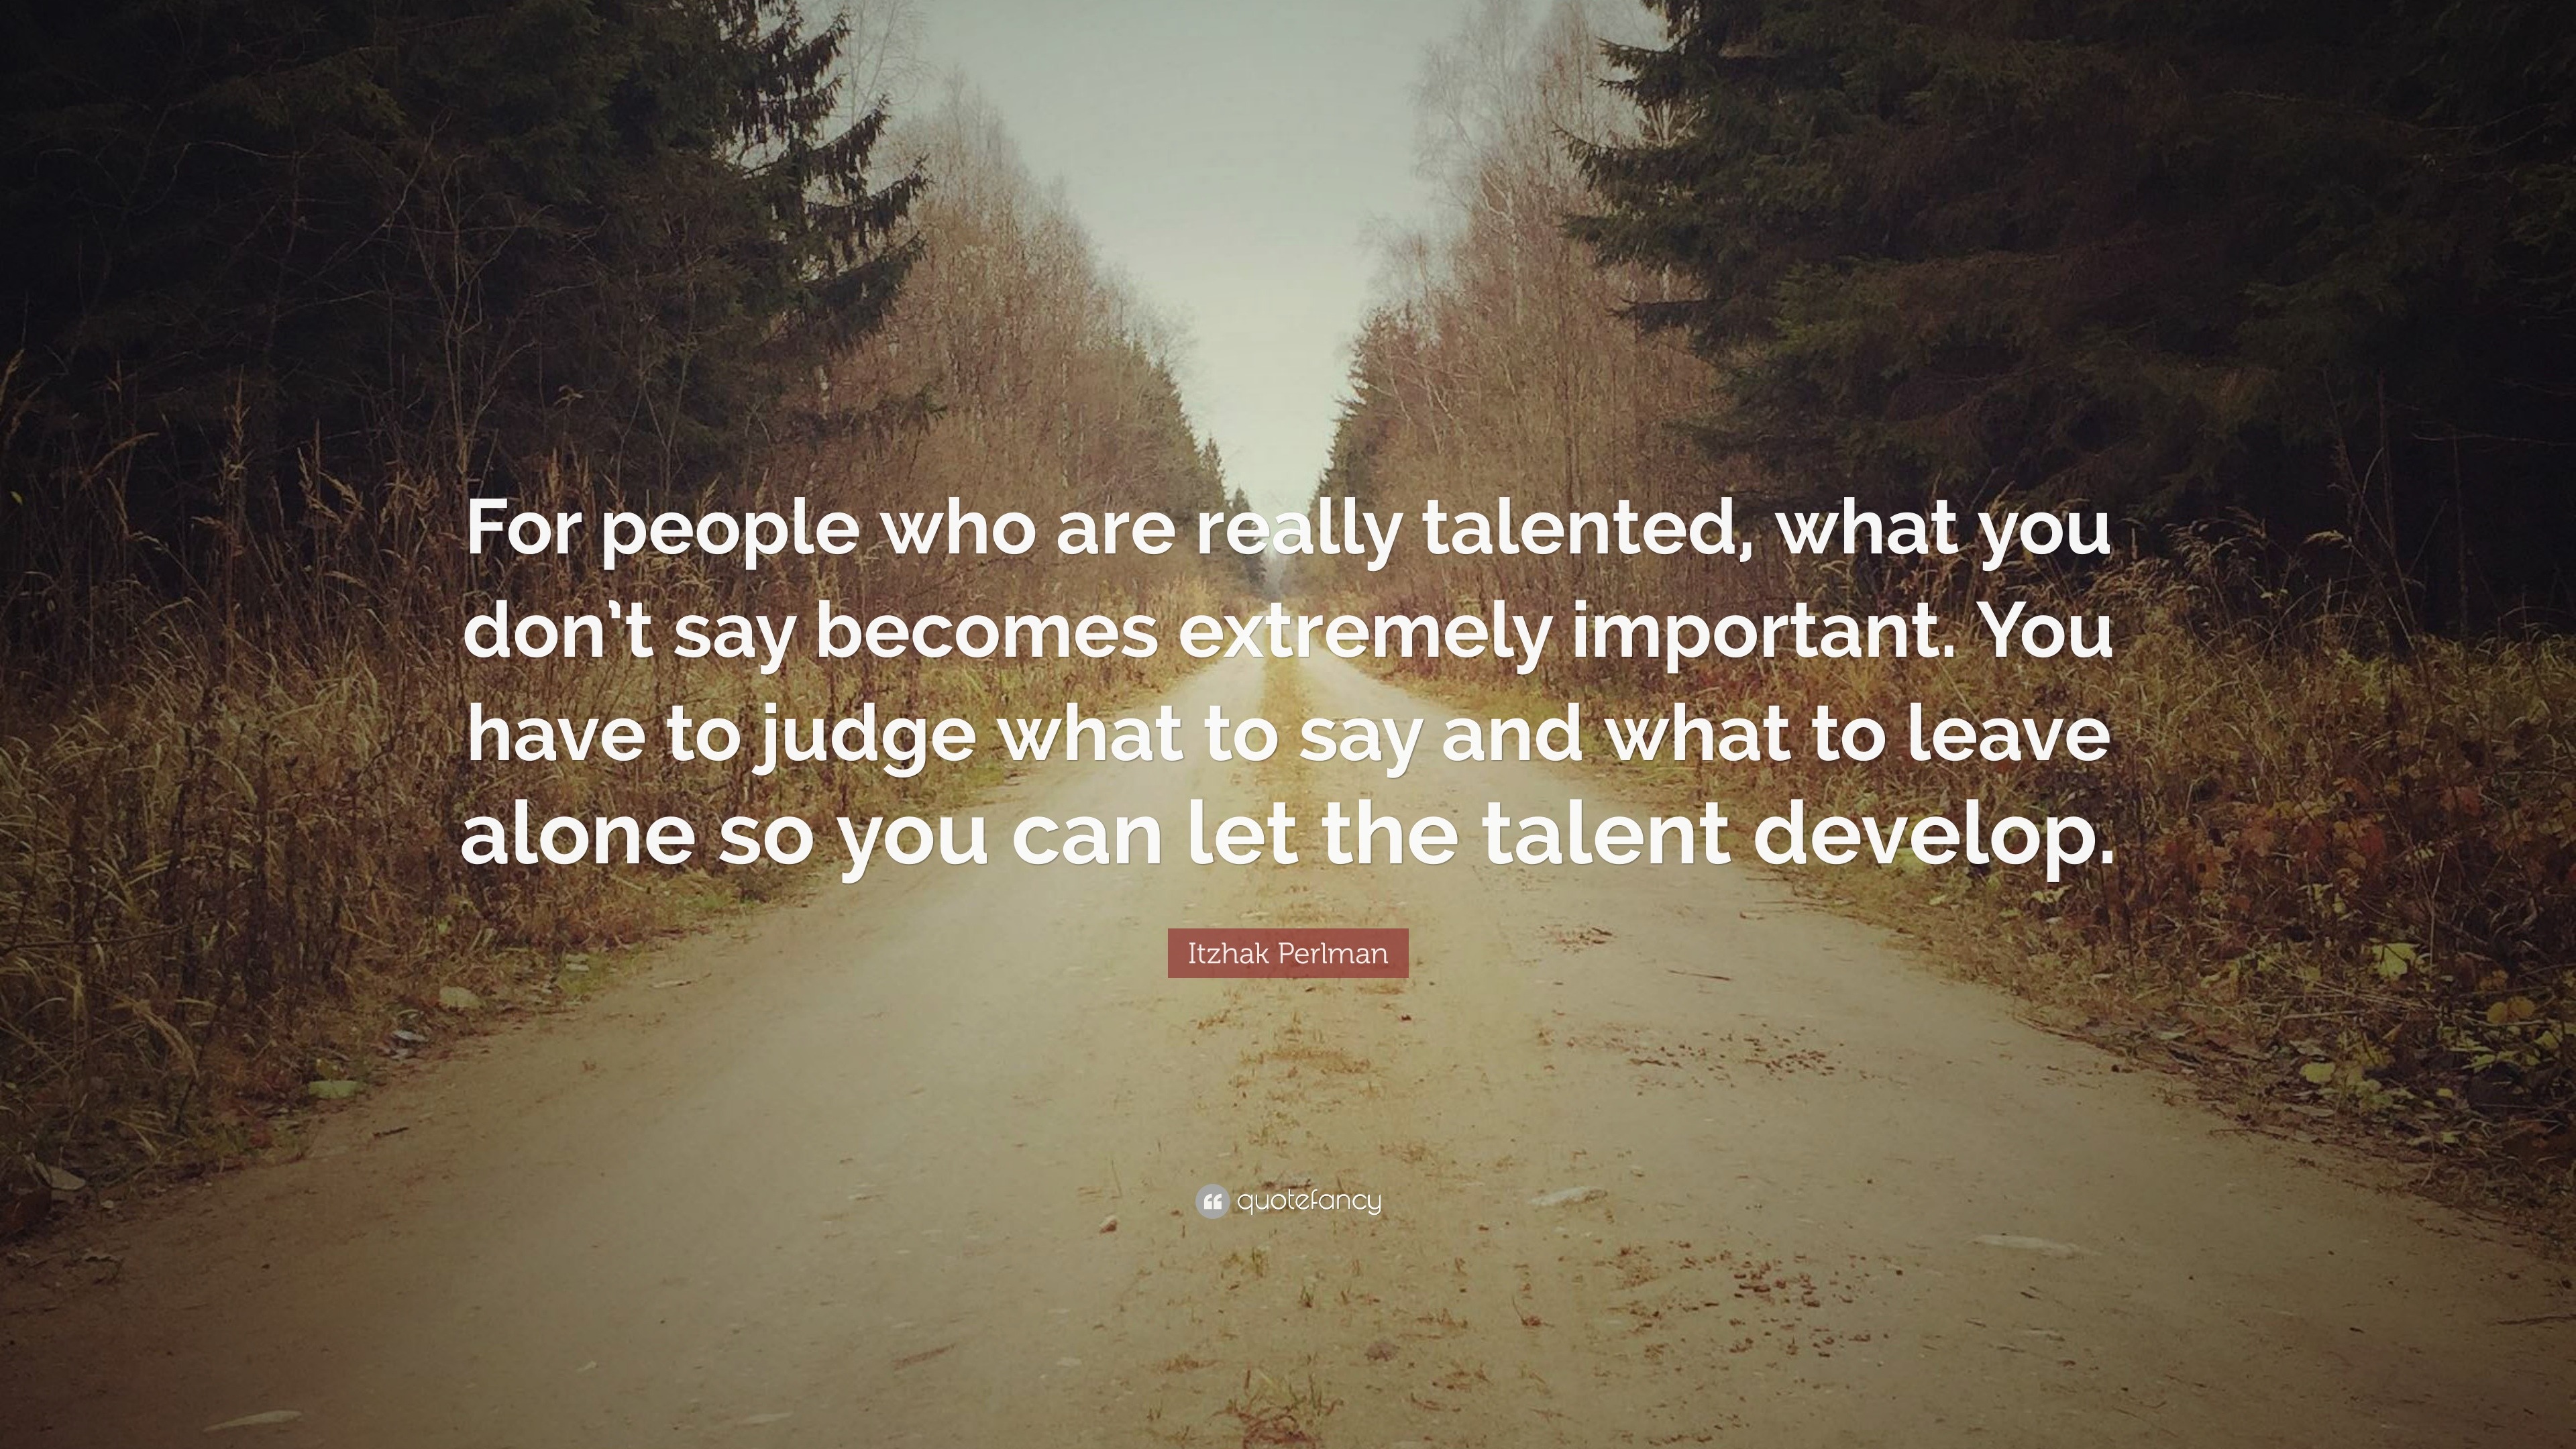 Itzhak Perlman Quote: “For people who are really talented, what you don